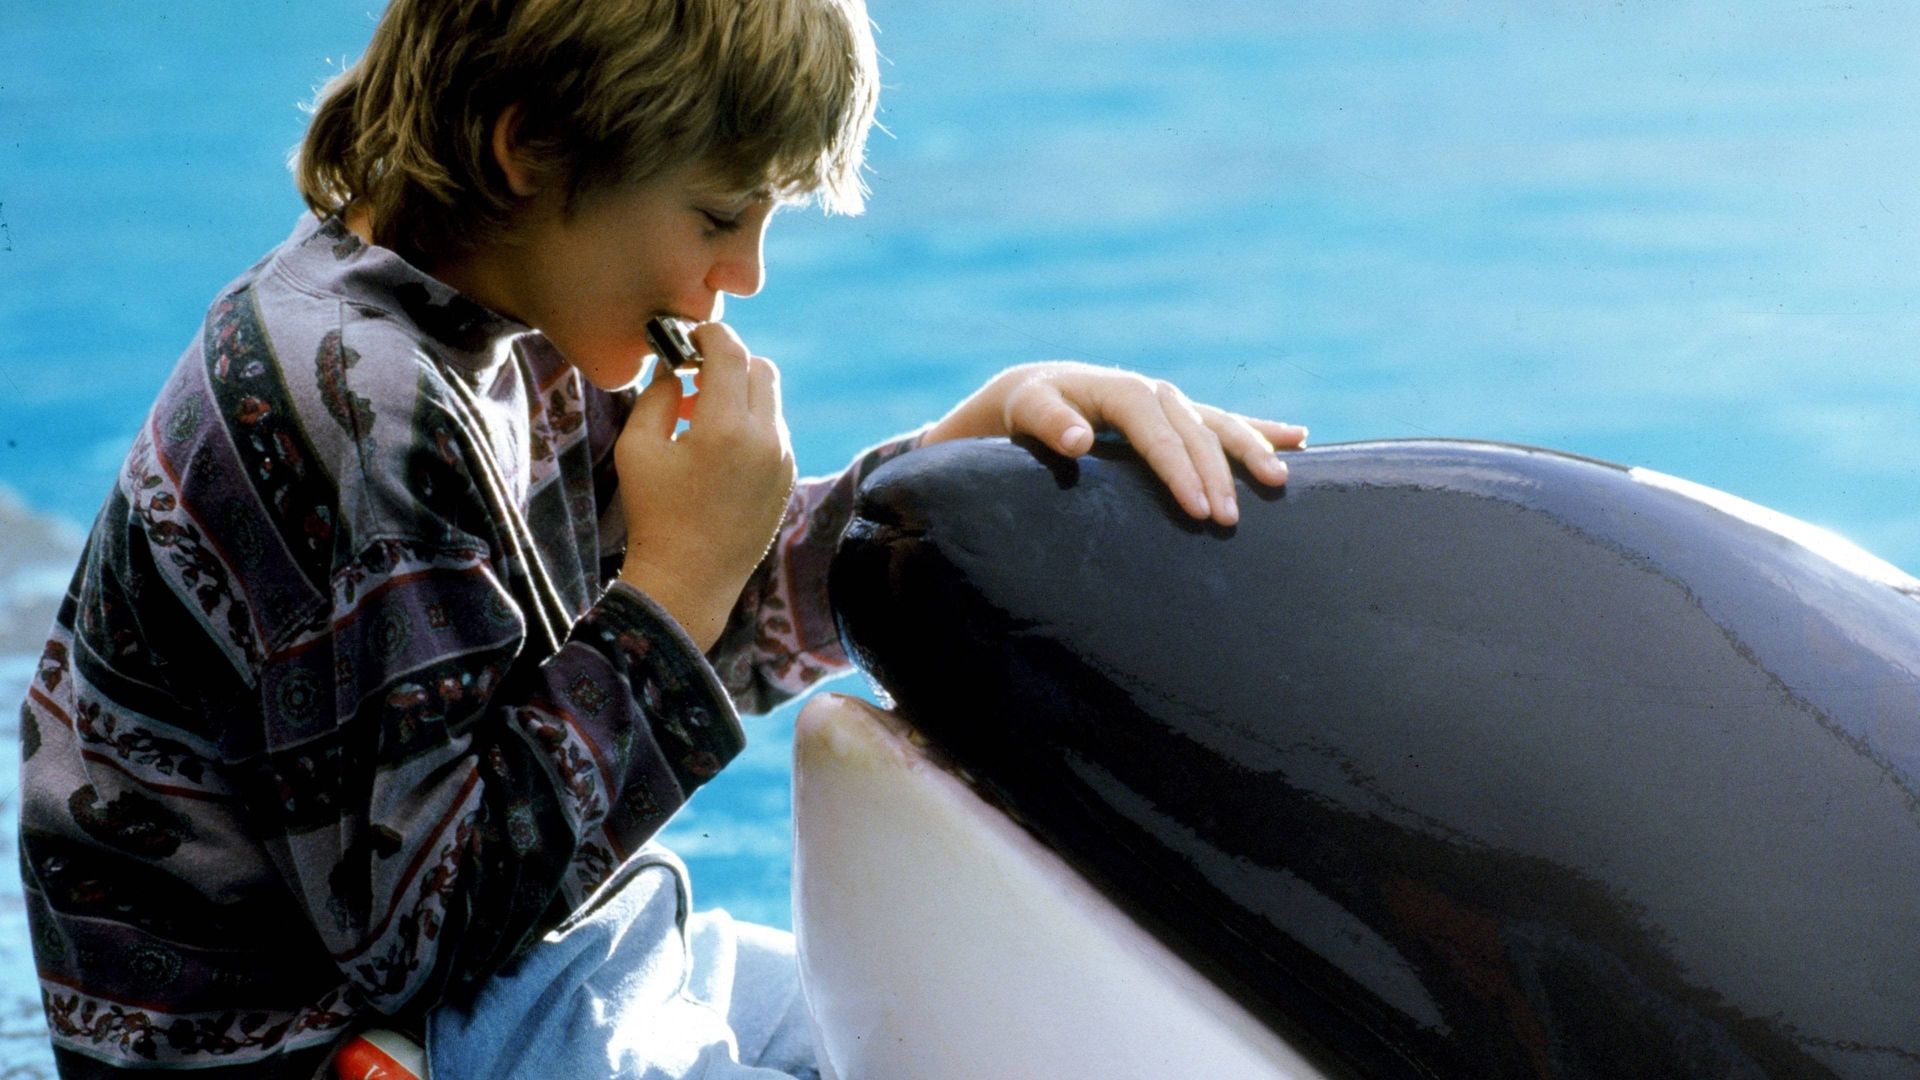 Sauvez Willy Free Willy HD Wallpaper 